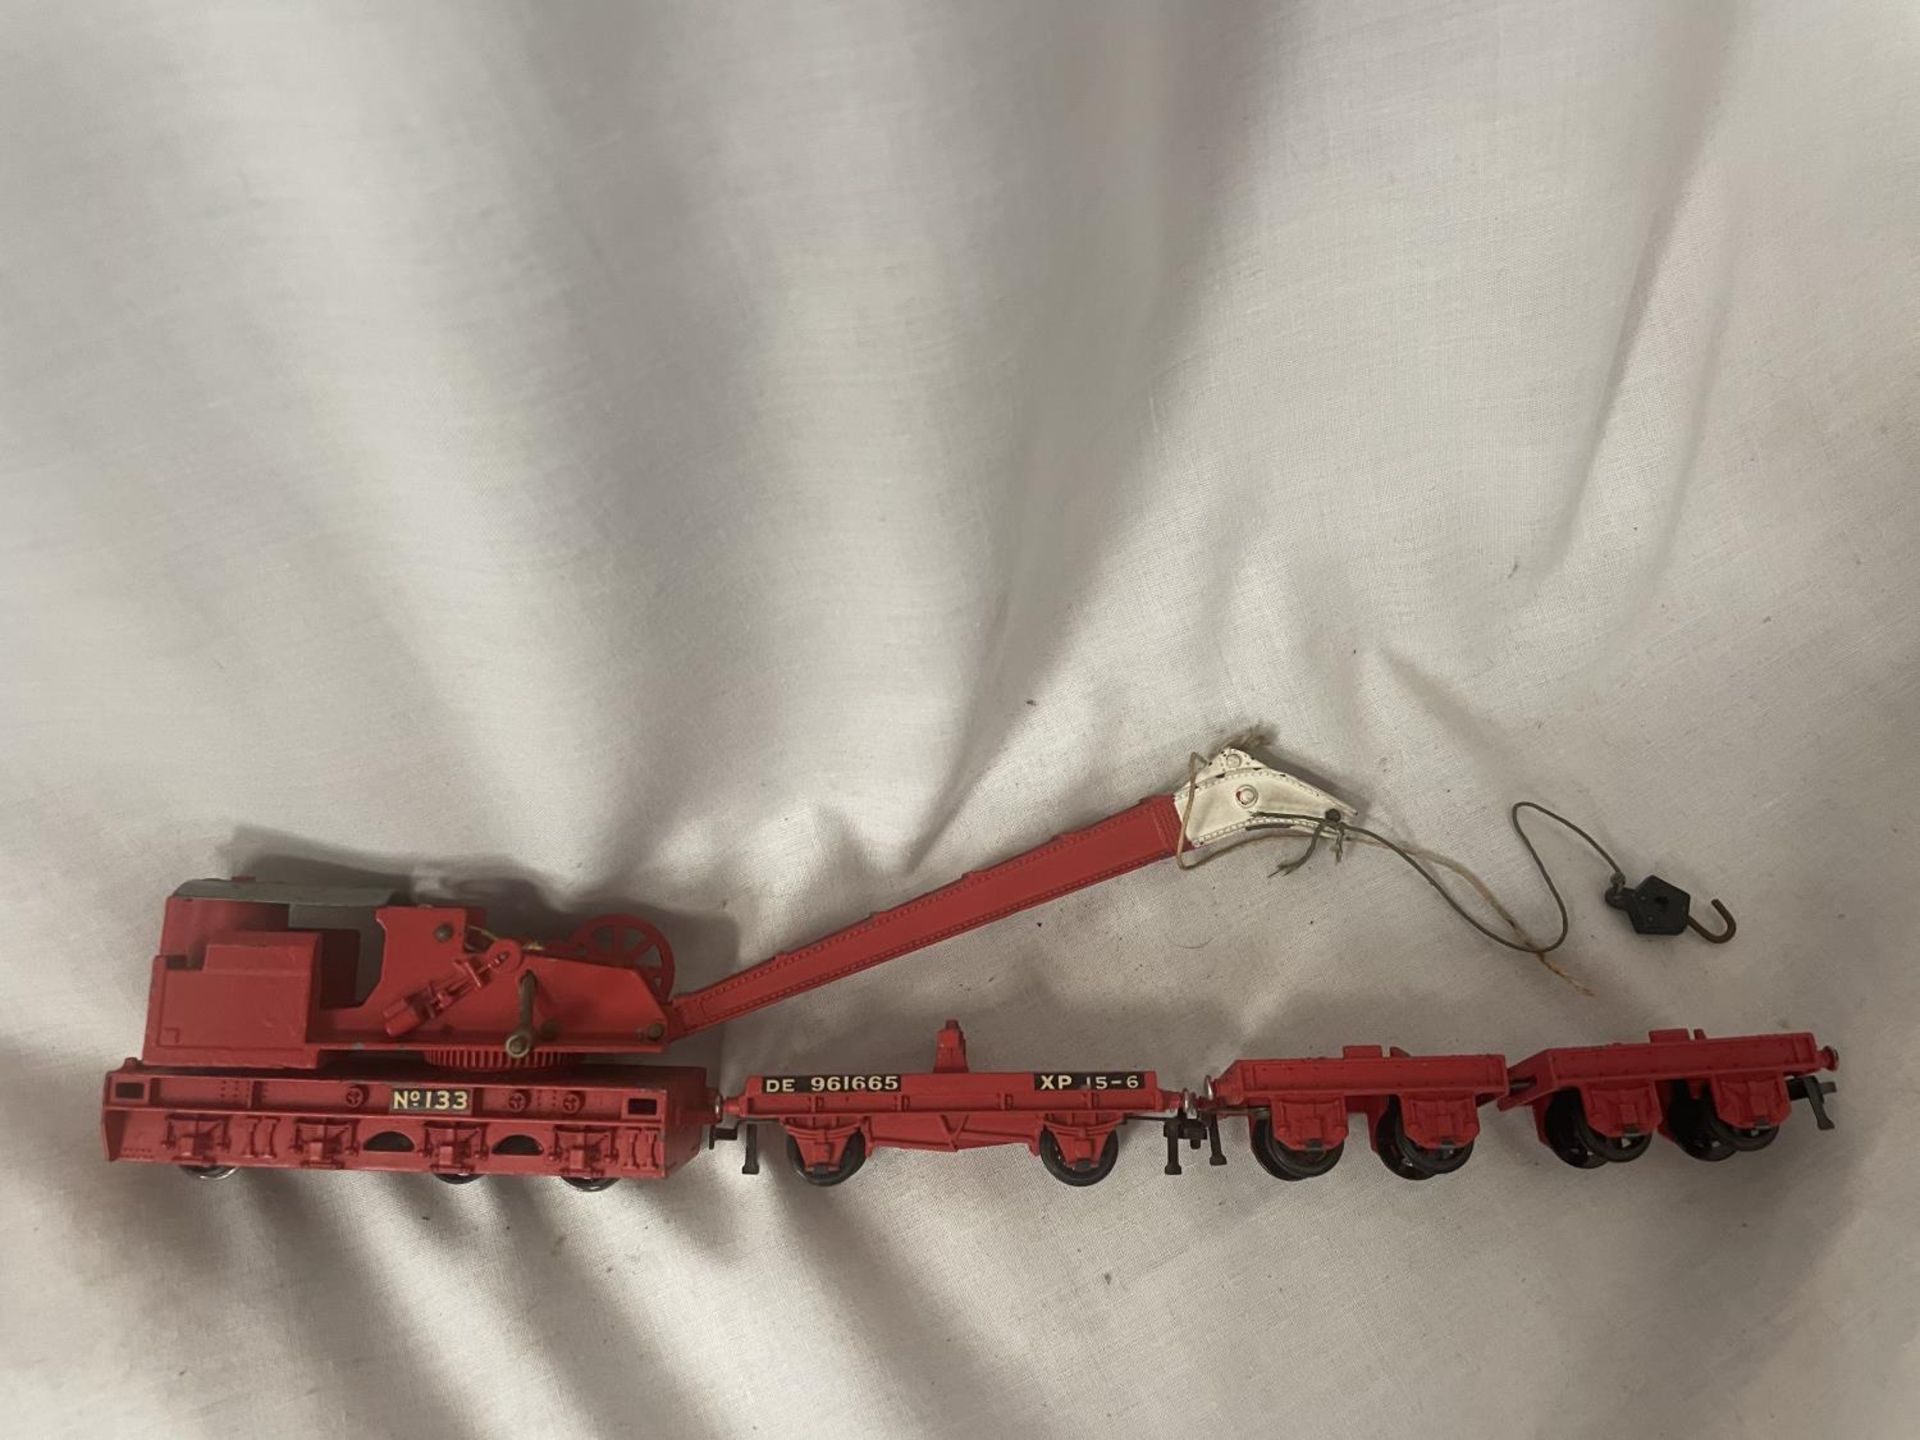 VARIOUS HORNBY DUBLO ITEMS - A 2-6-2 LOCOMOTIVE "DORCHESTER" AND TENDER, A NUMBER 133 CRANE, - Image 5 of 9